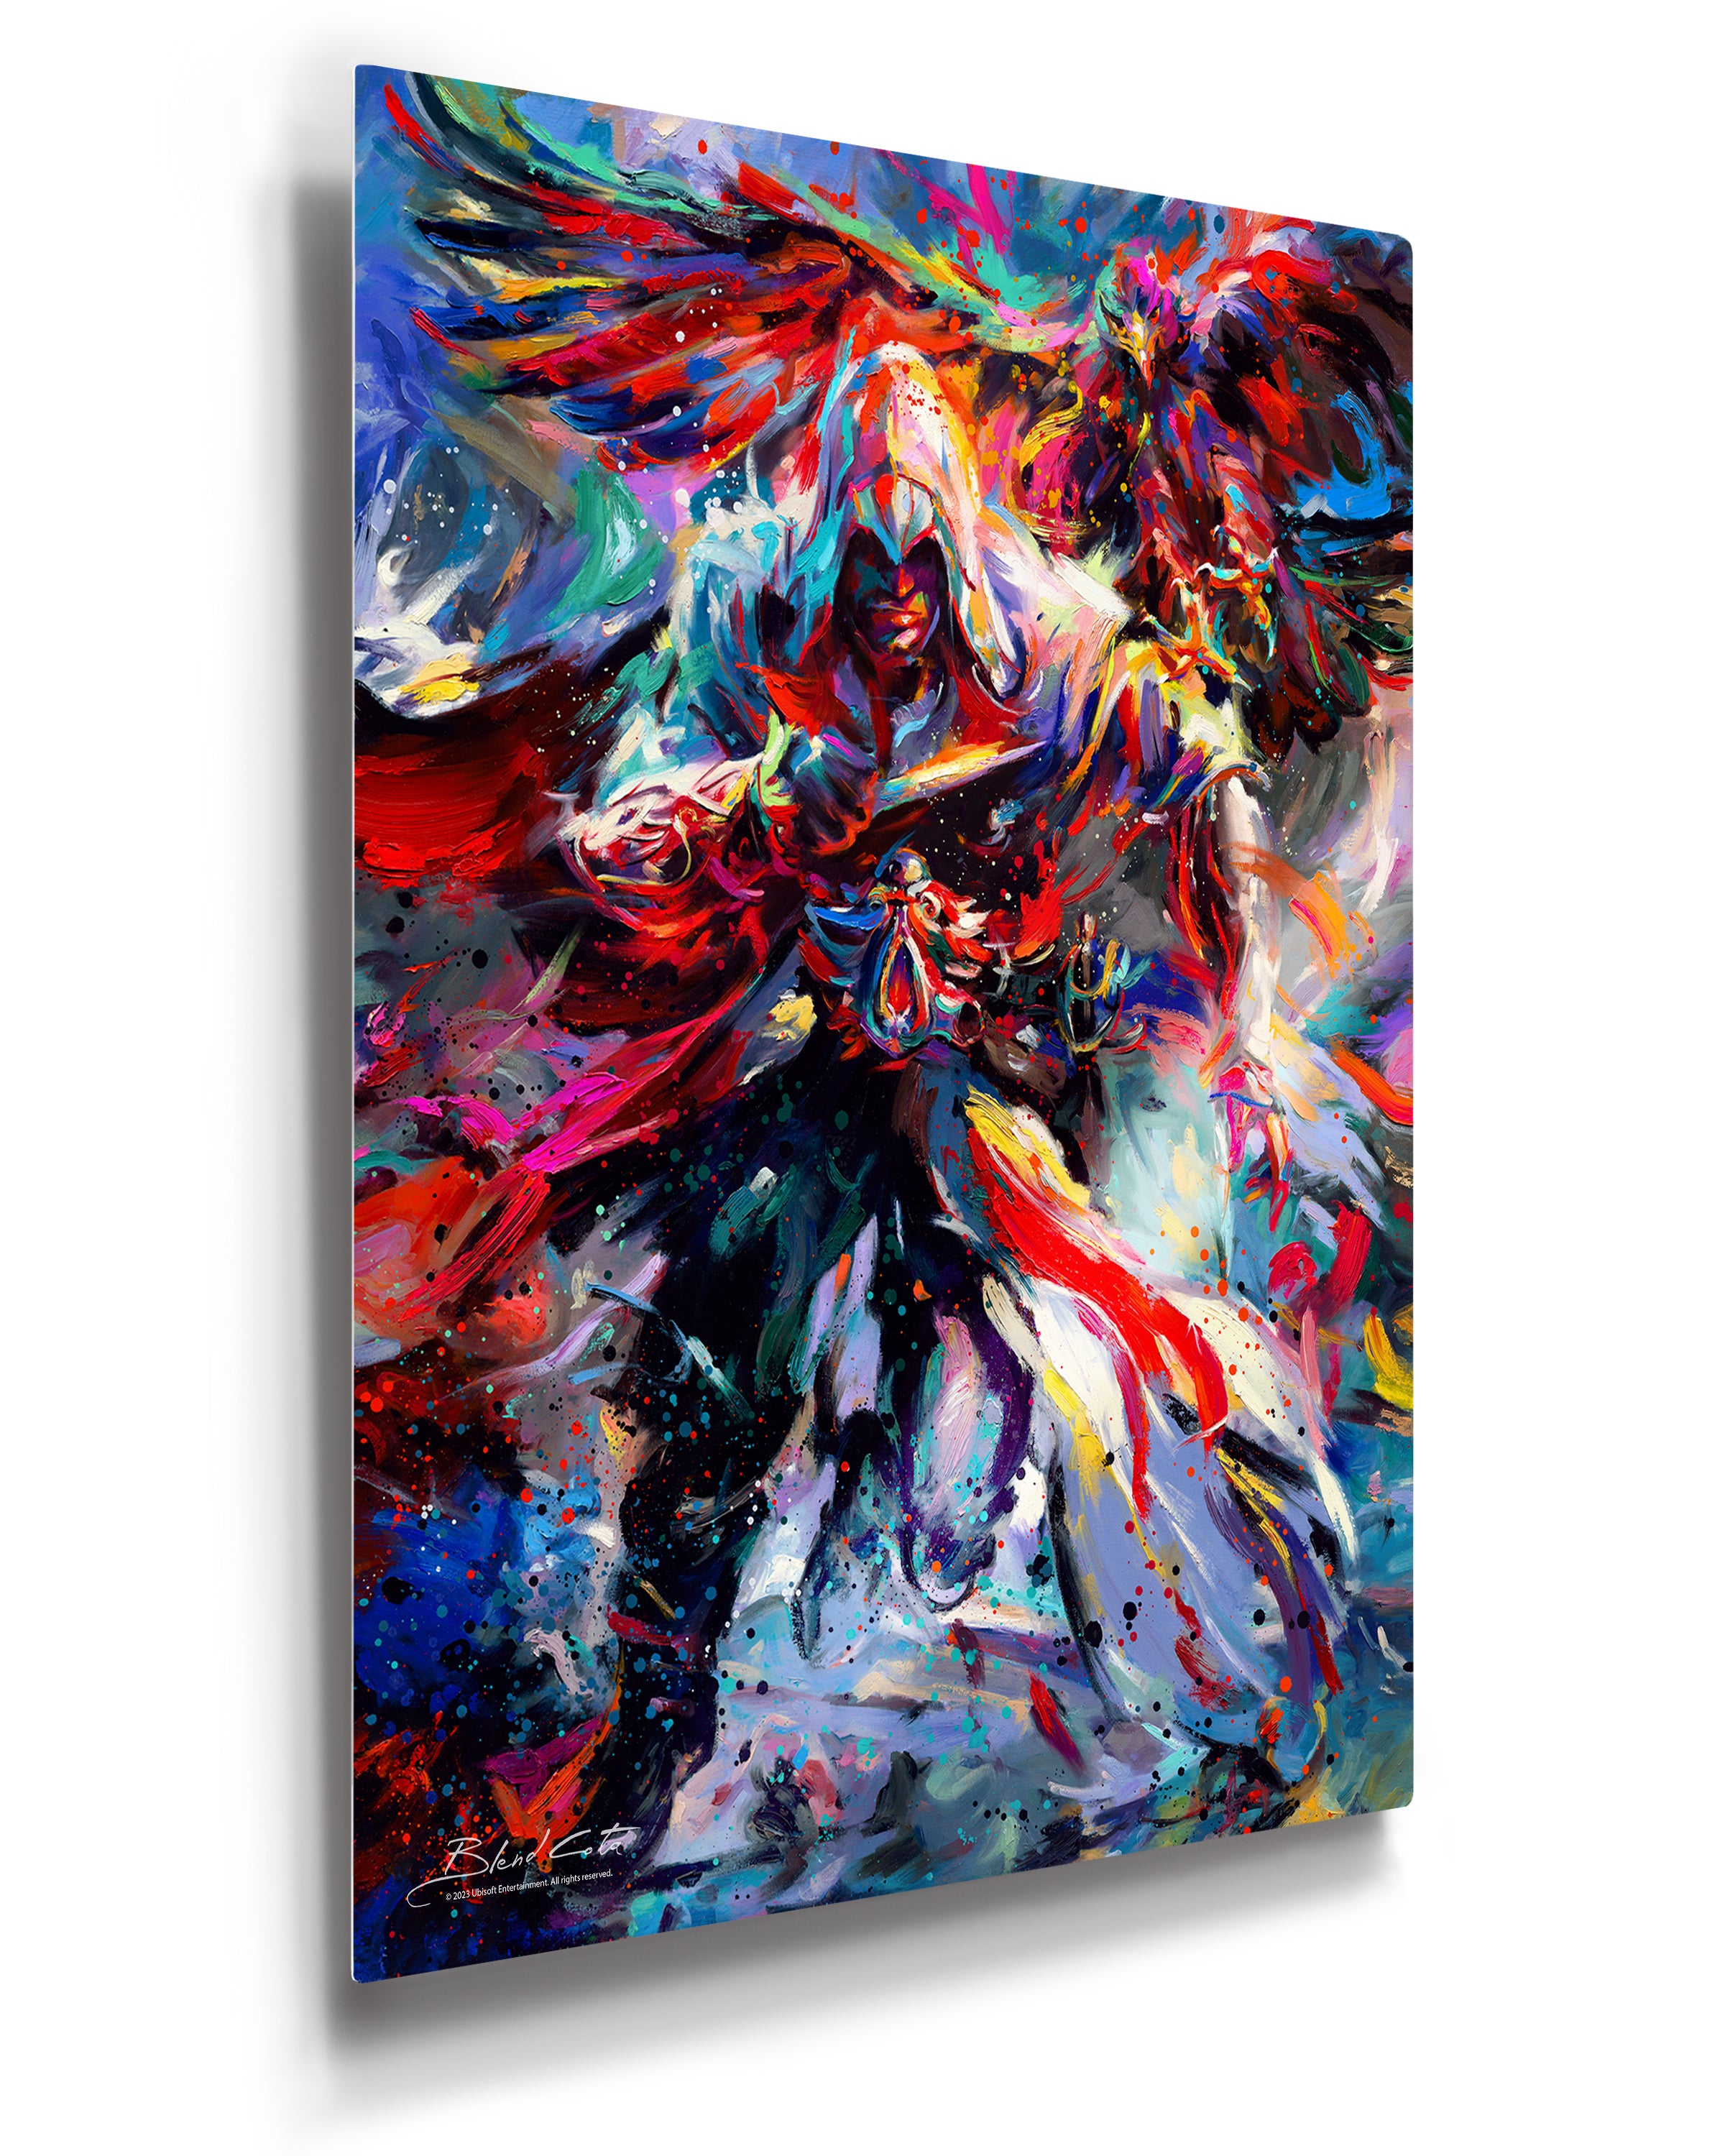 Limited Edition glossy metal print of Assassin's Creed Ezio Auditore and Eagle bursting forth with energy and painted with colorful brushstrokes in an expressionistic style.